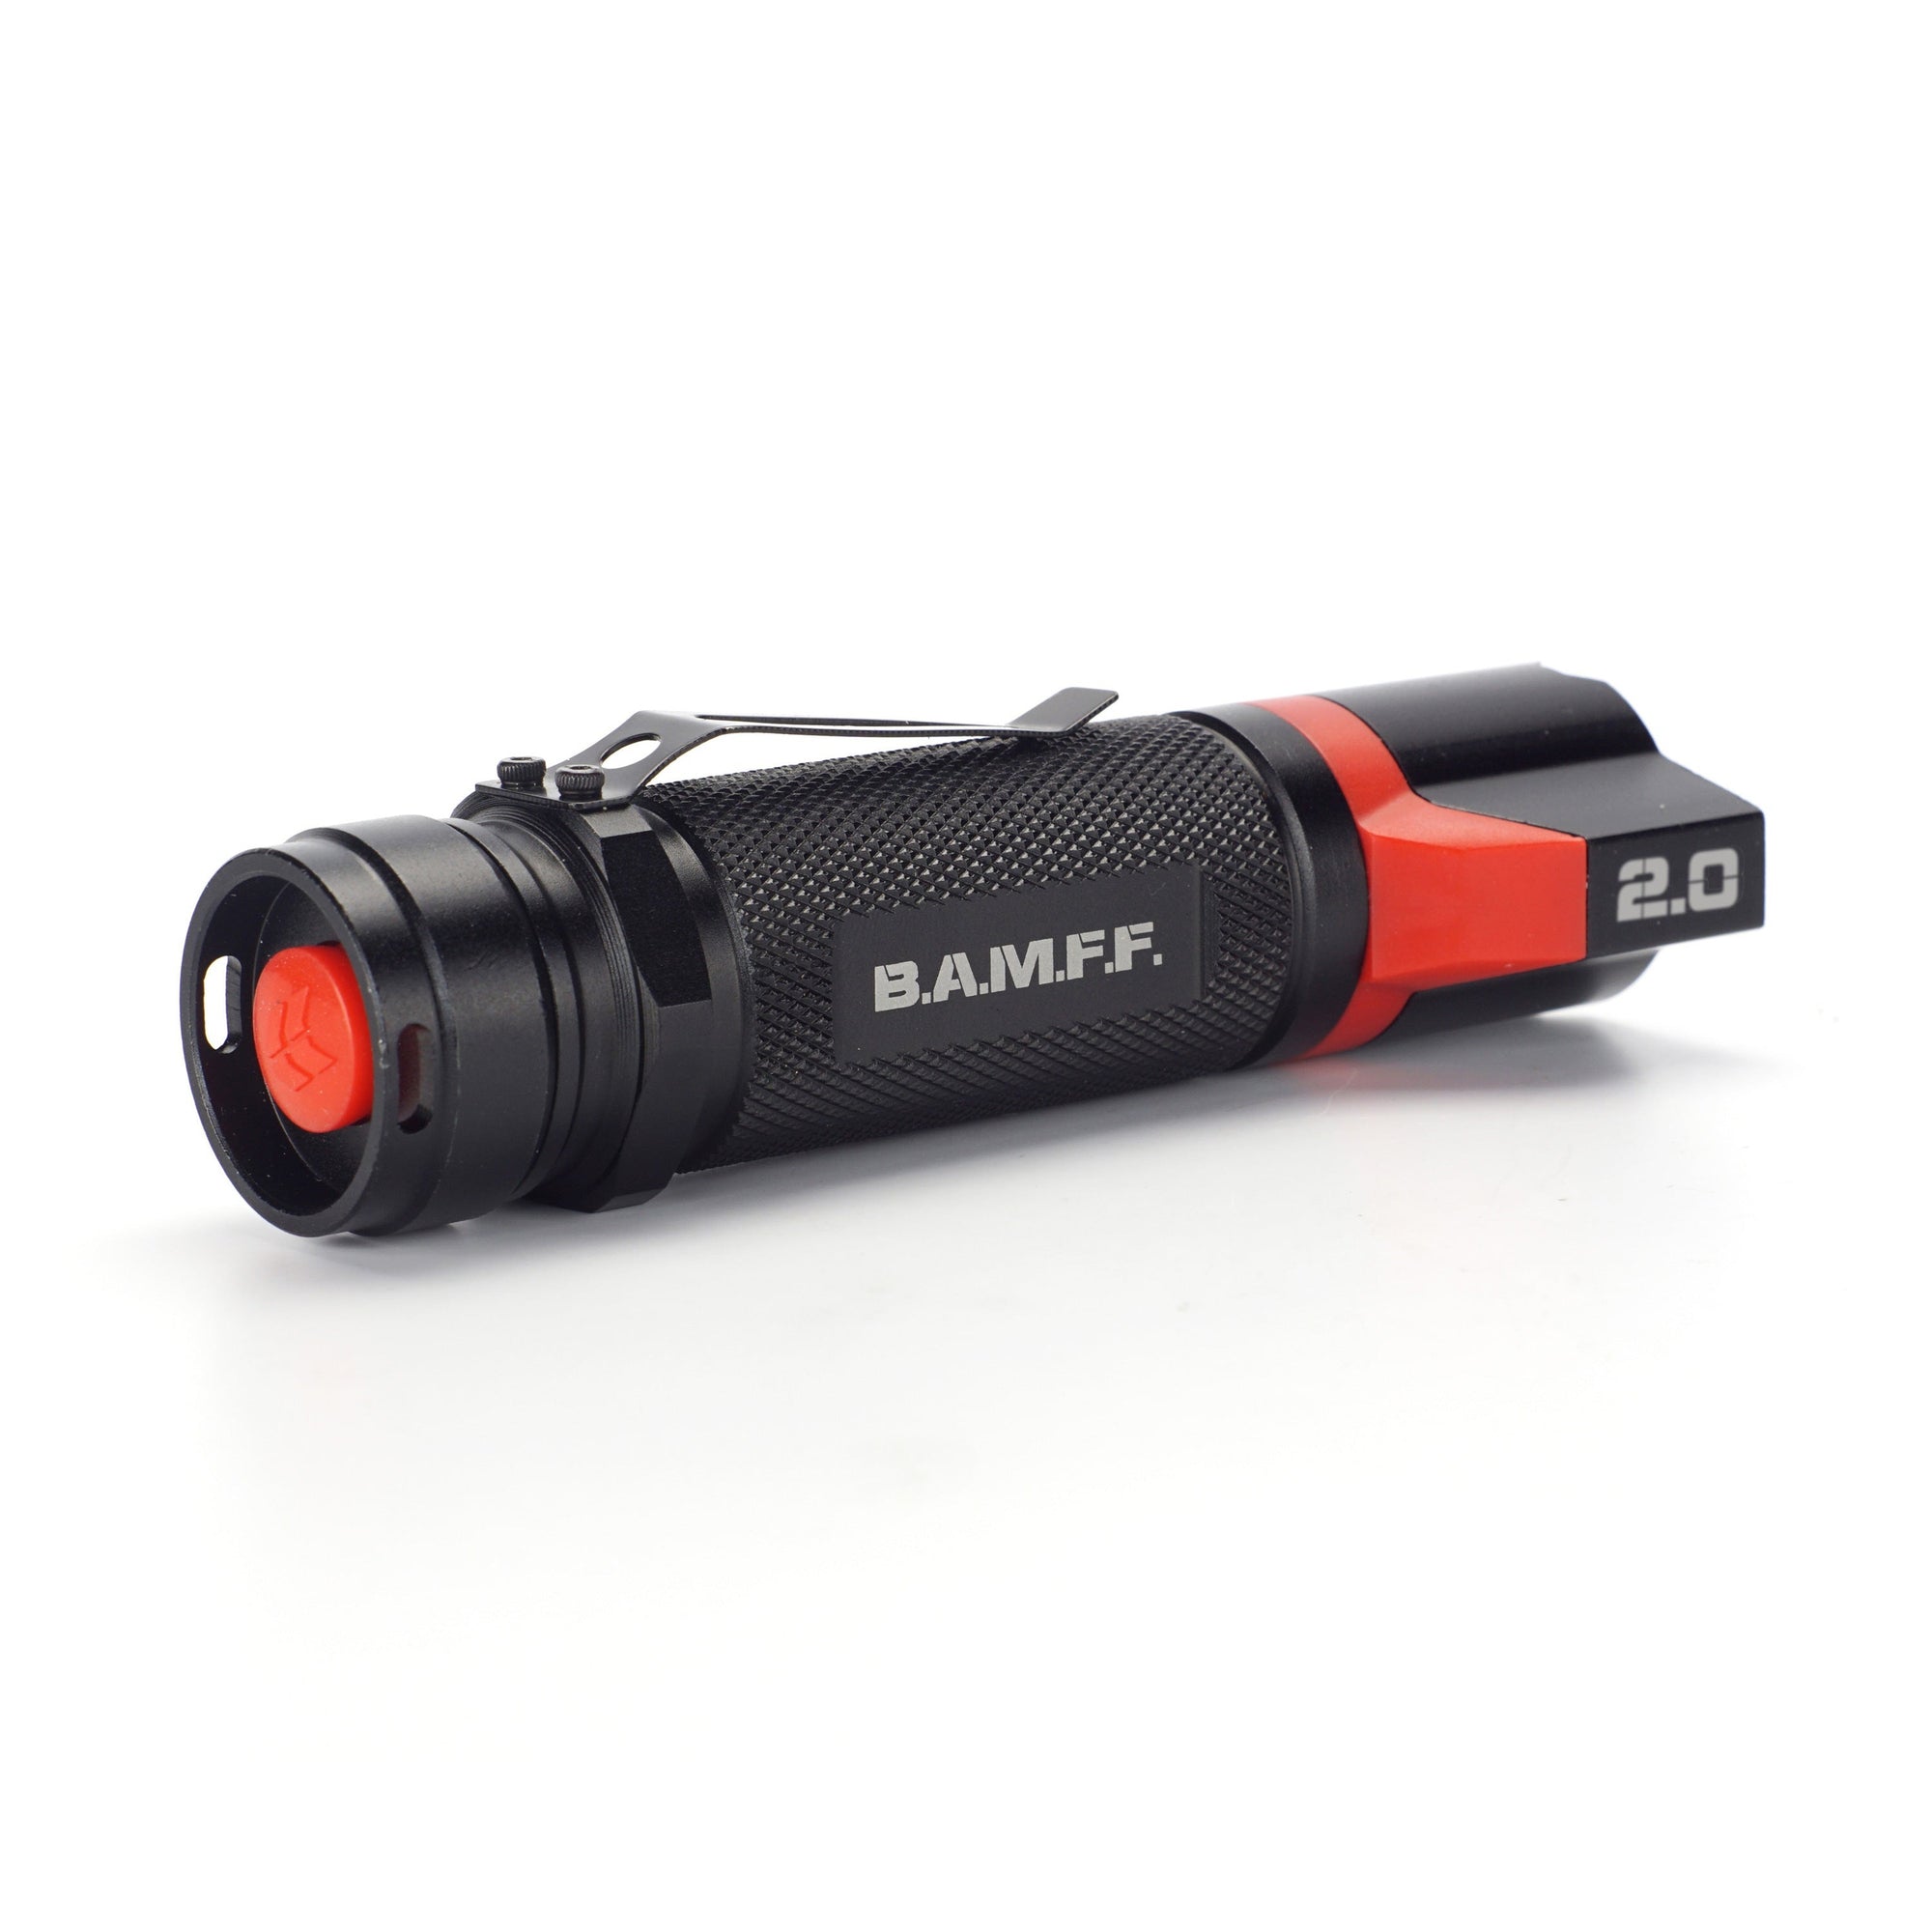 BAMFF 2.0 dual LED flashlight long distance and area lighting in one | STKR Concepts - striker flashlight